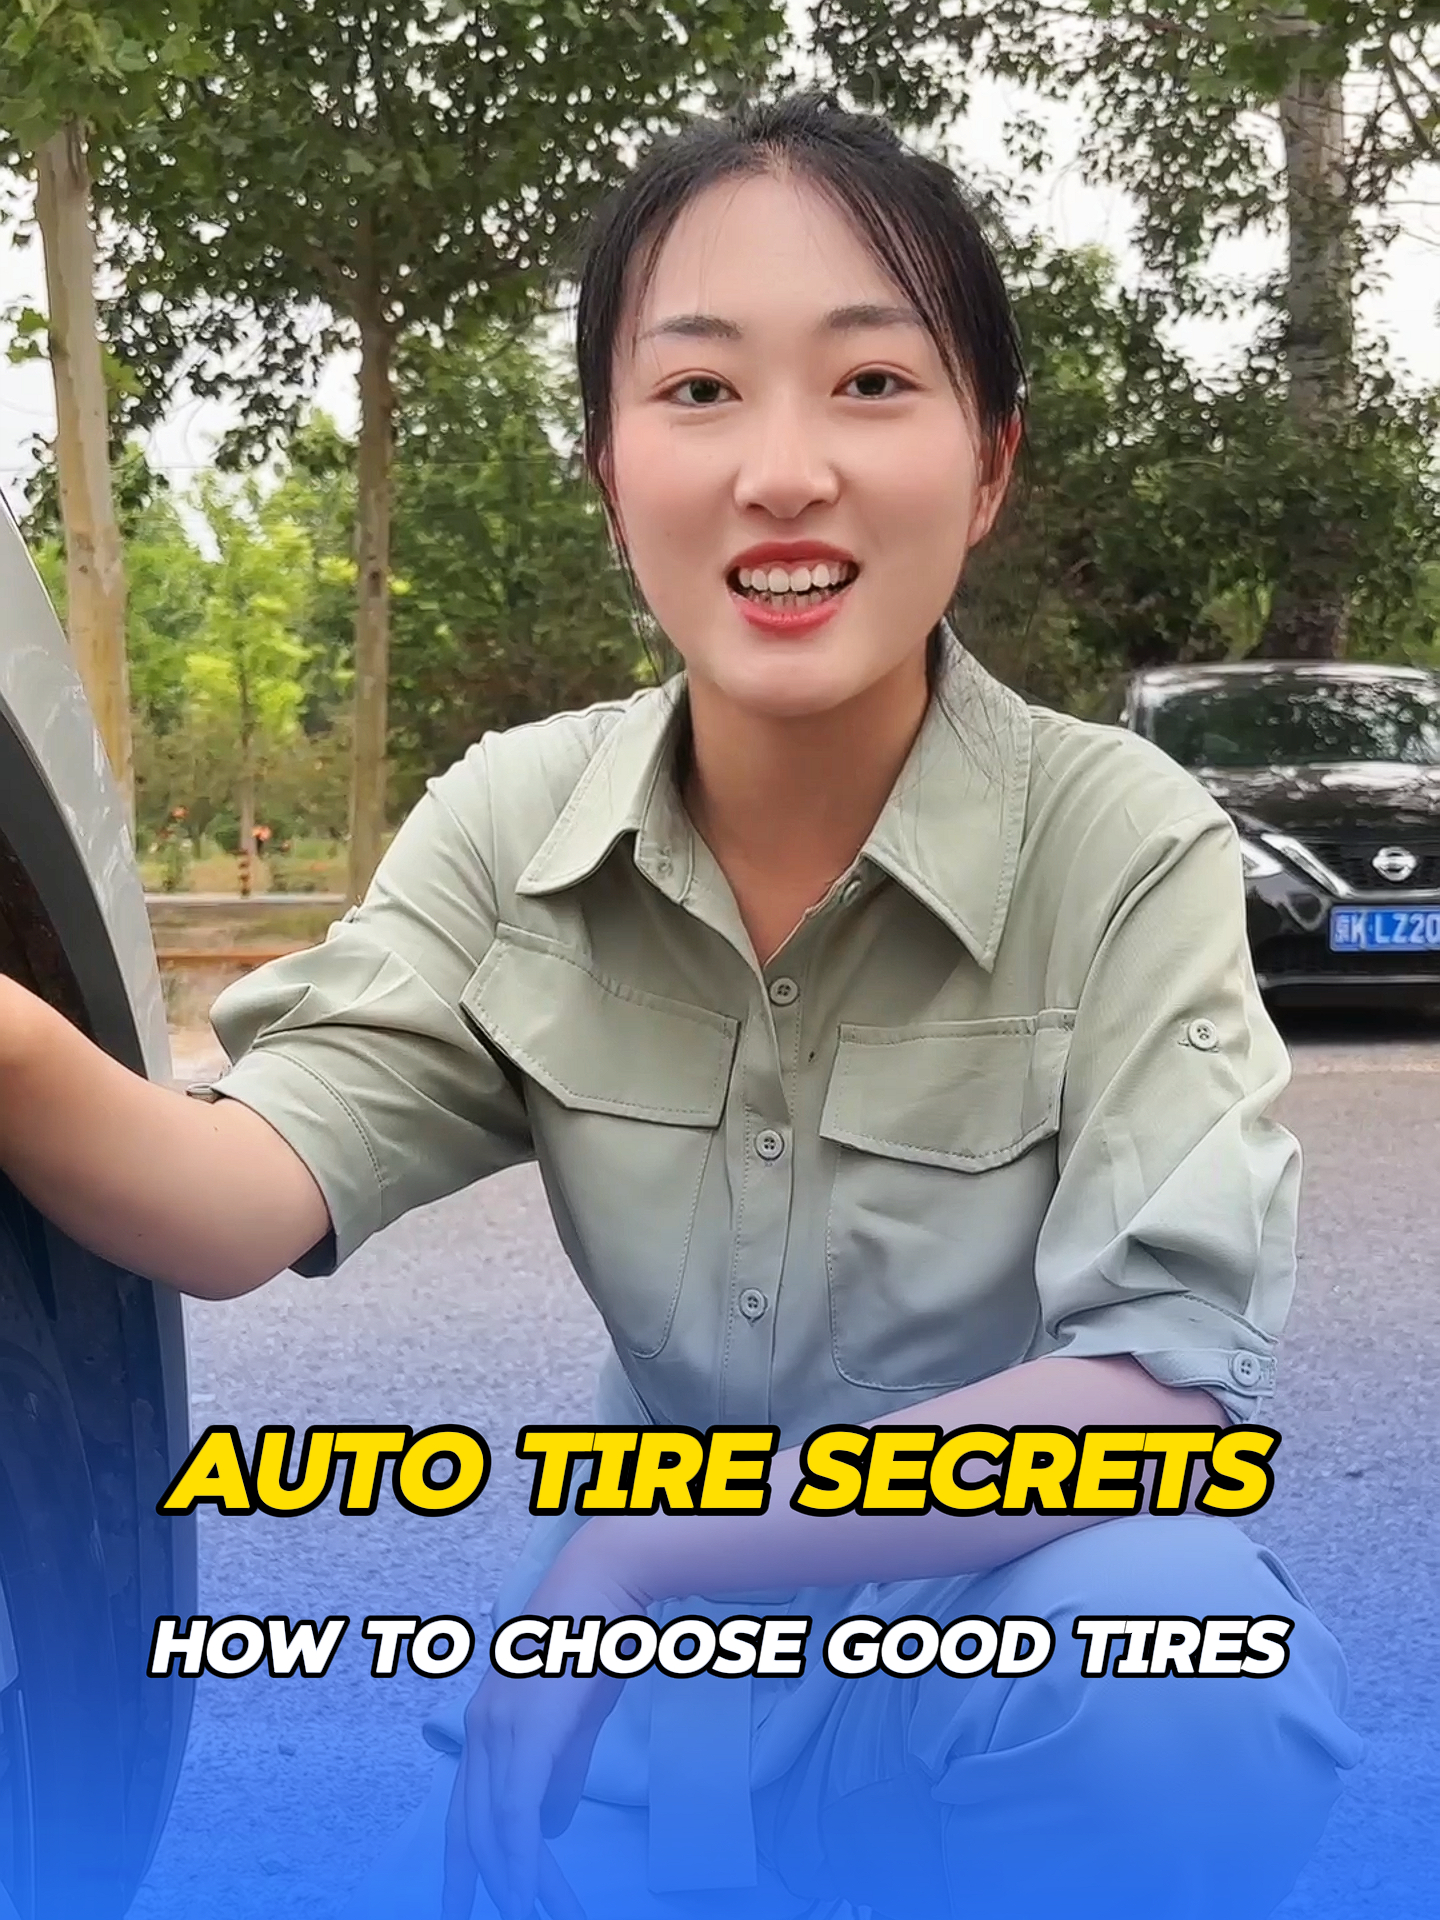 Watch this video before buying new tires and save $3,000! #carsafety#cardriver#skill #carowner#car#tires